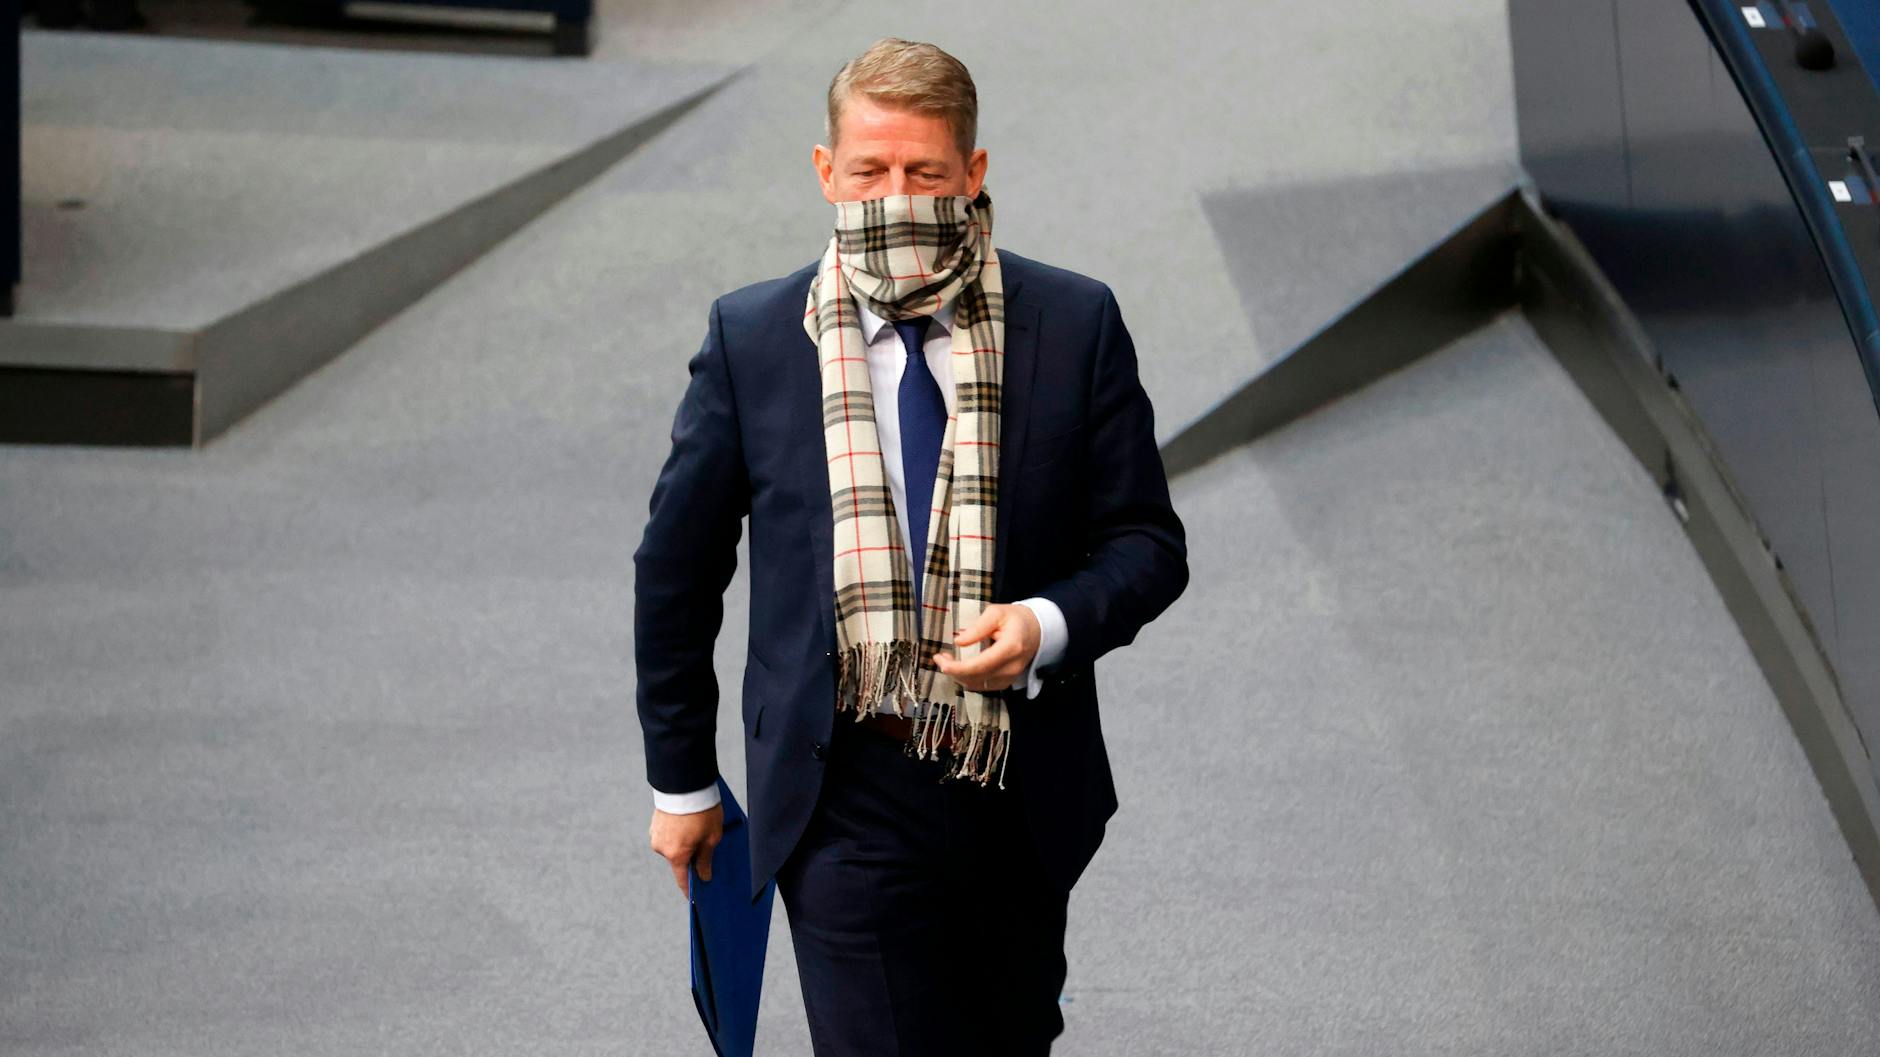 Karsten Hilse of the far-right AfD wears a scarf to cover his mouth and nose as he arrives to speak during a debate at the Bundestag on Friday morning.